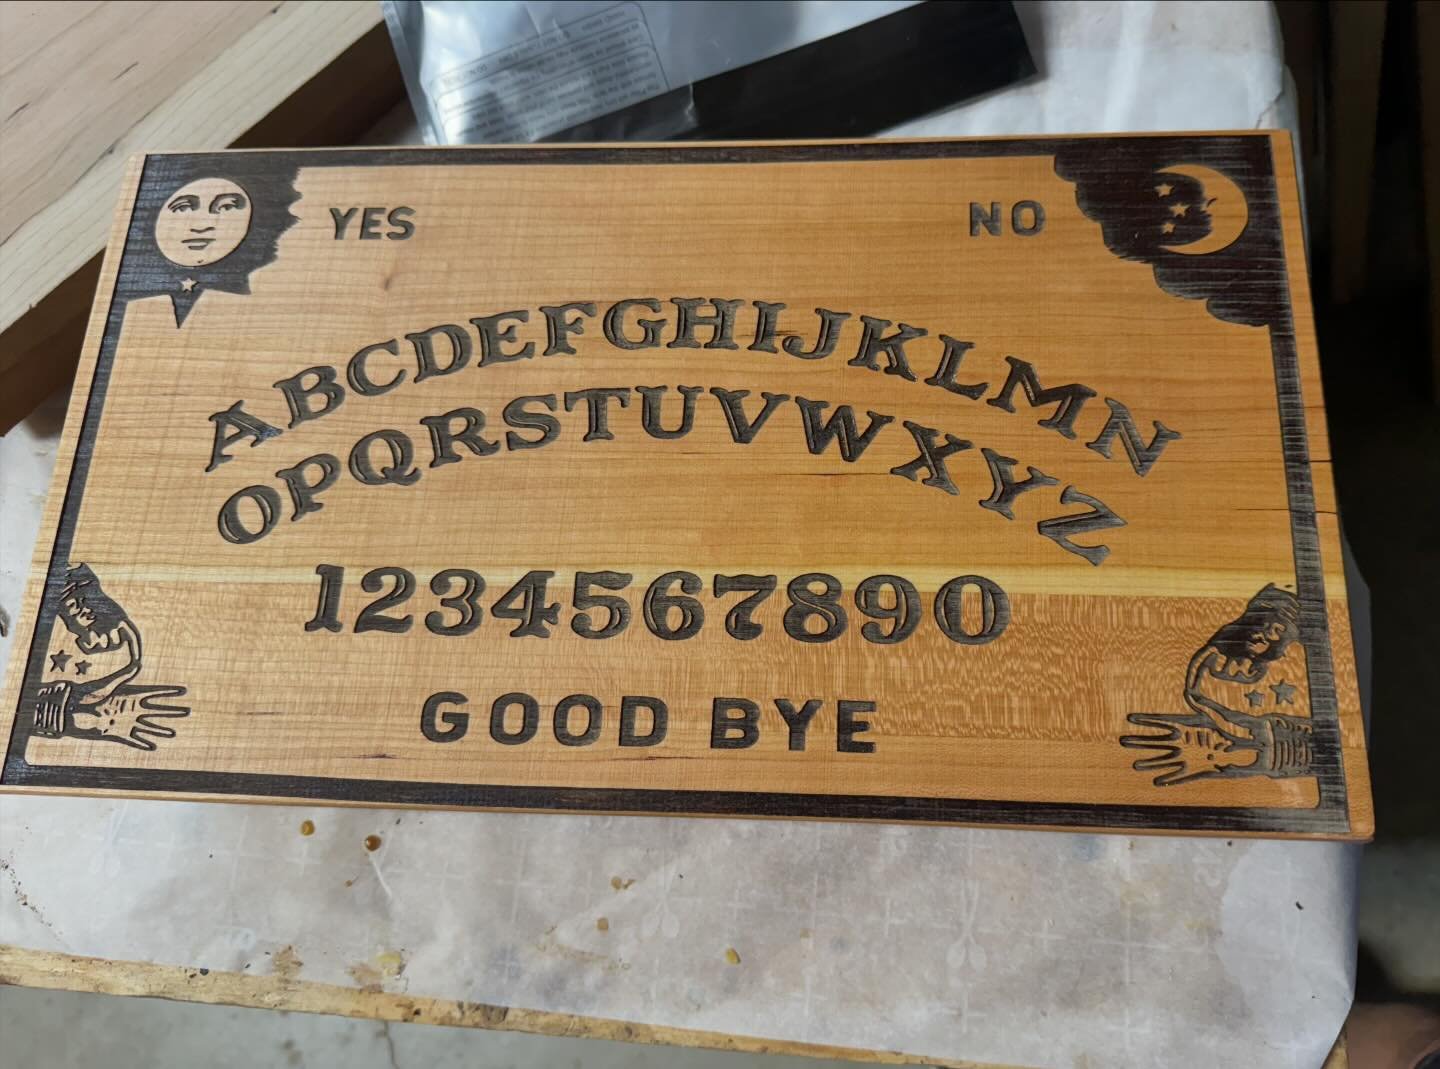 Something new for 2 vending events this weekend
16x9 Ouija Board, made in Cherry

Today(5/10) @thechathamfarmersmarket 3-7 Chatham, NY
Tomorrow (5/11) @yaymarkets Peekskill, NY